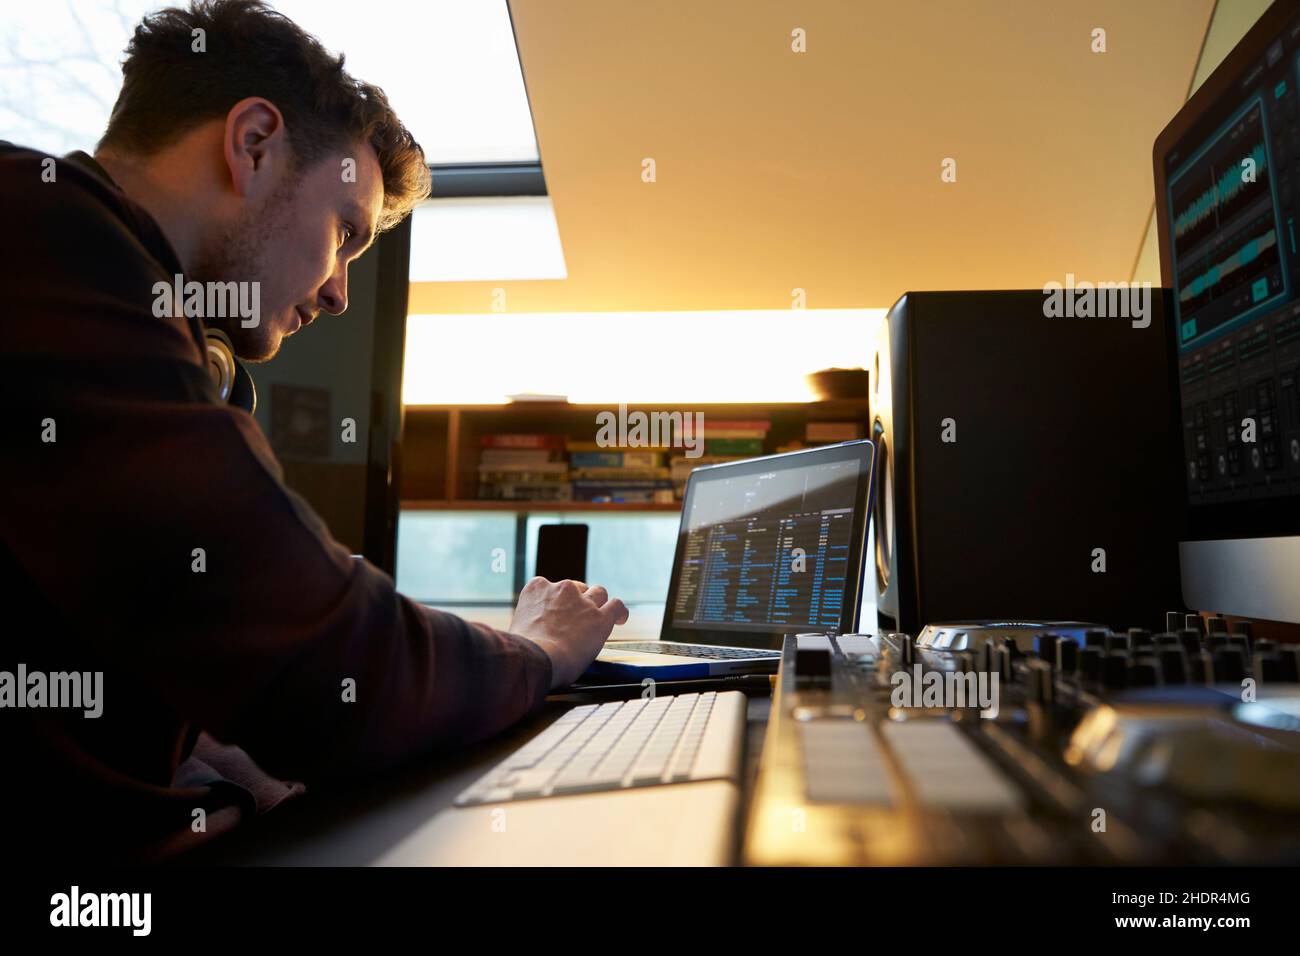 music, mixing, music production, musics, music industry, music productions Stock Photo